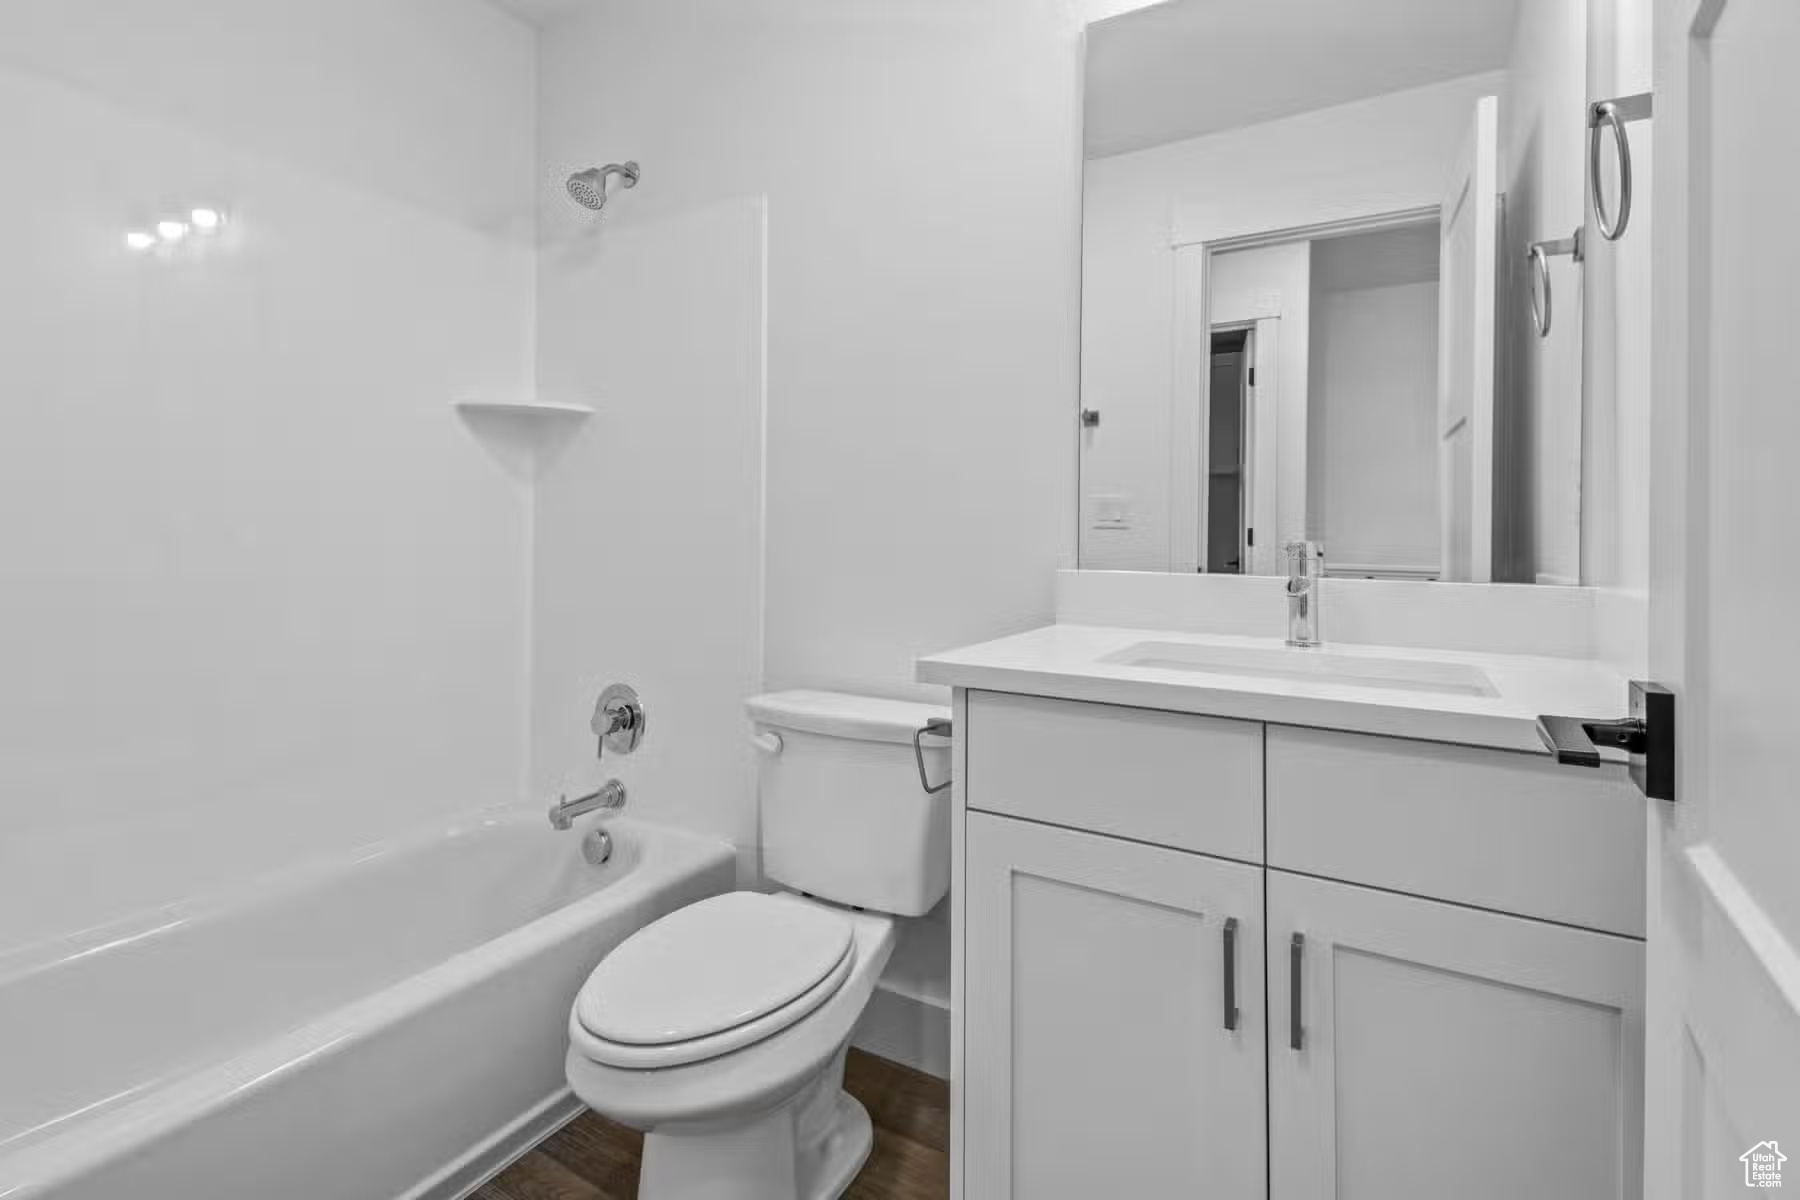 Full bathroom with tub / shower combination, hardwood / wood-style flooring, toilet, and vanity with extensive cabinet space